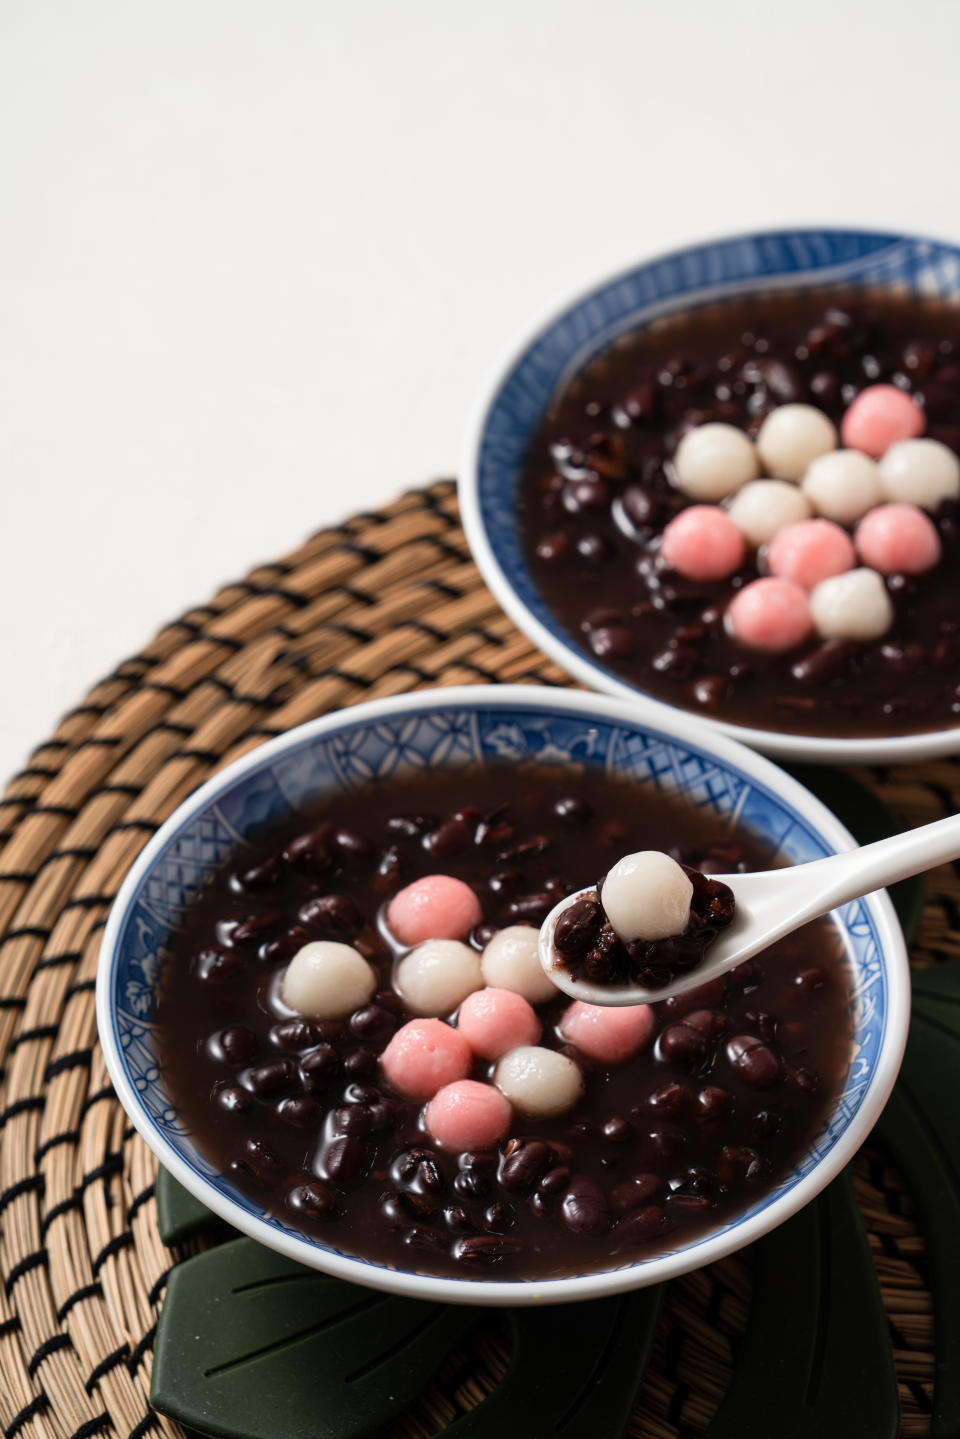 Close up of red and white tangyuan (tang yuan, glutinous rice dumpling balls) with sweet red bean soup in a bowl on white table background for Winter solstice festival food.